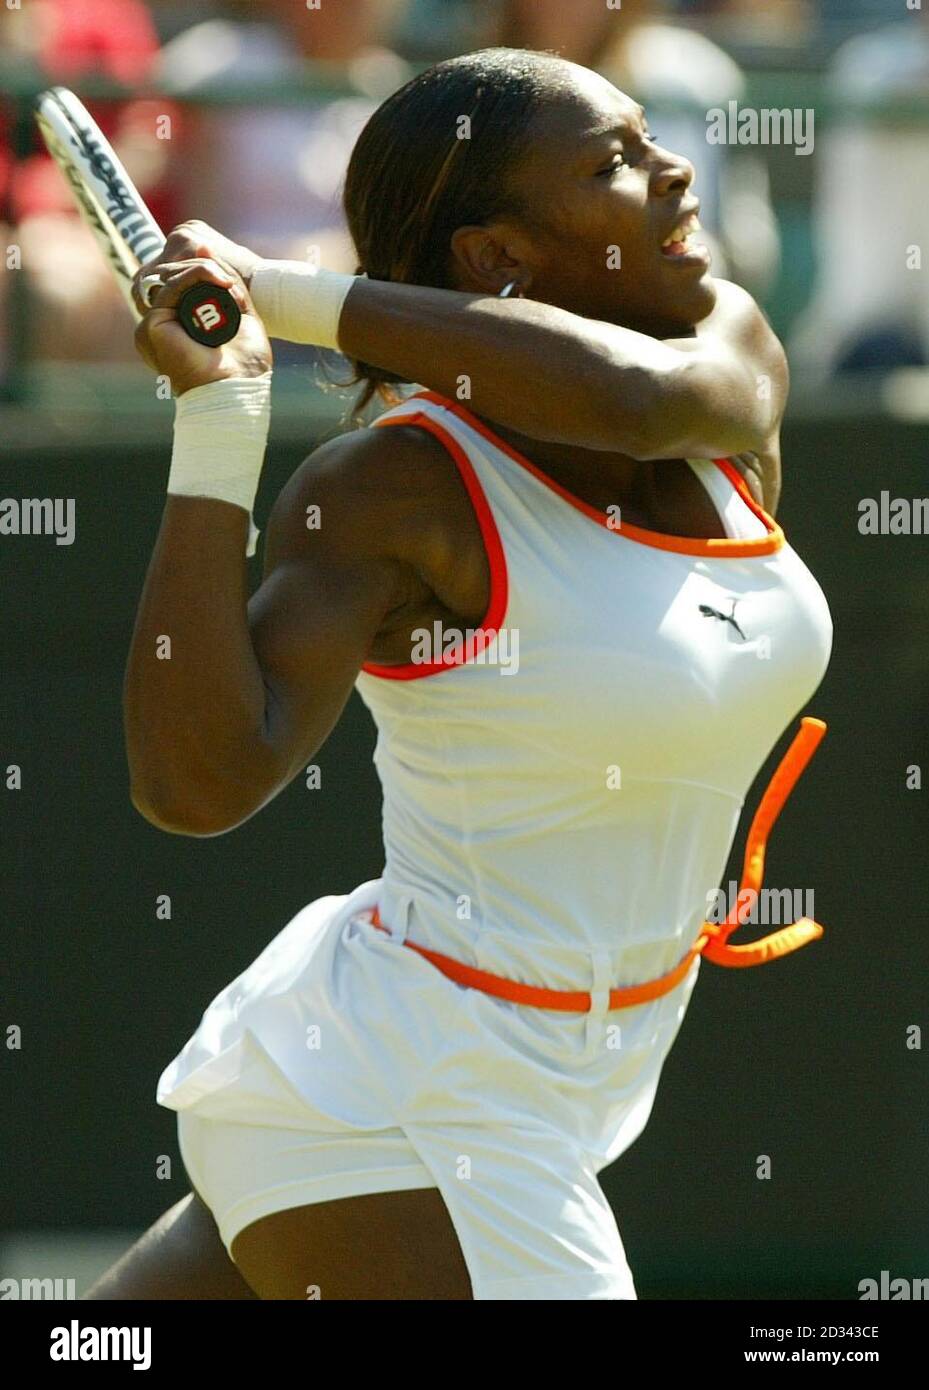 Defending champion Serena Williams from the USA in action before defeating fellow American Laura Granville straight sets in the third round at the All England Lawn Tennis Championships at Wimbledon. Stock Photo